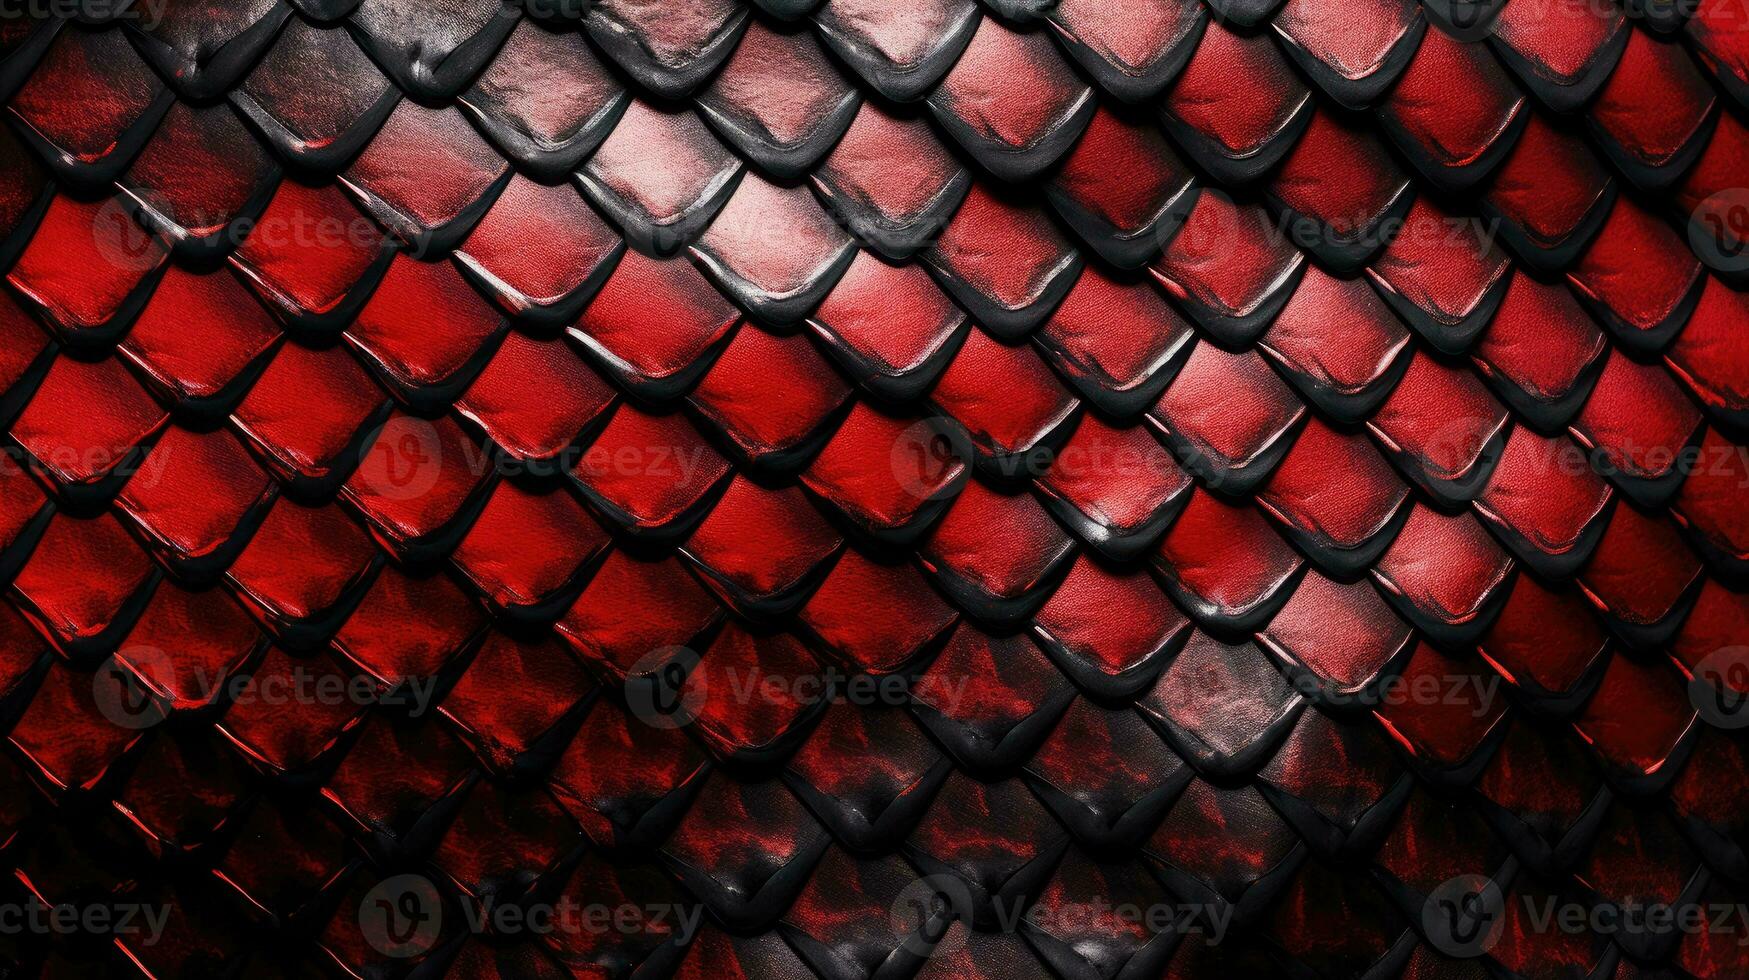 https://static.vecteezy.com/system/resources/previews/027/636/860/non_2x/red-and-black-exotic-snake-skin-pattern-or-dragon-scale-texture-as-a-wallpaper-photo.jpg